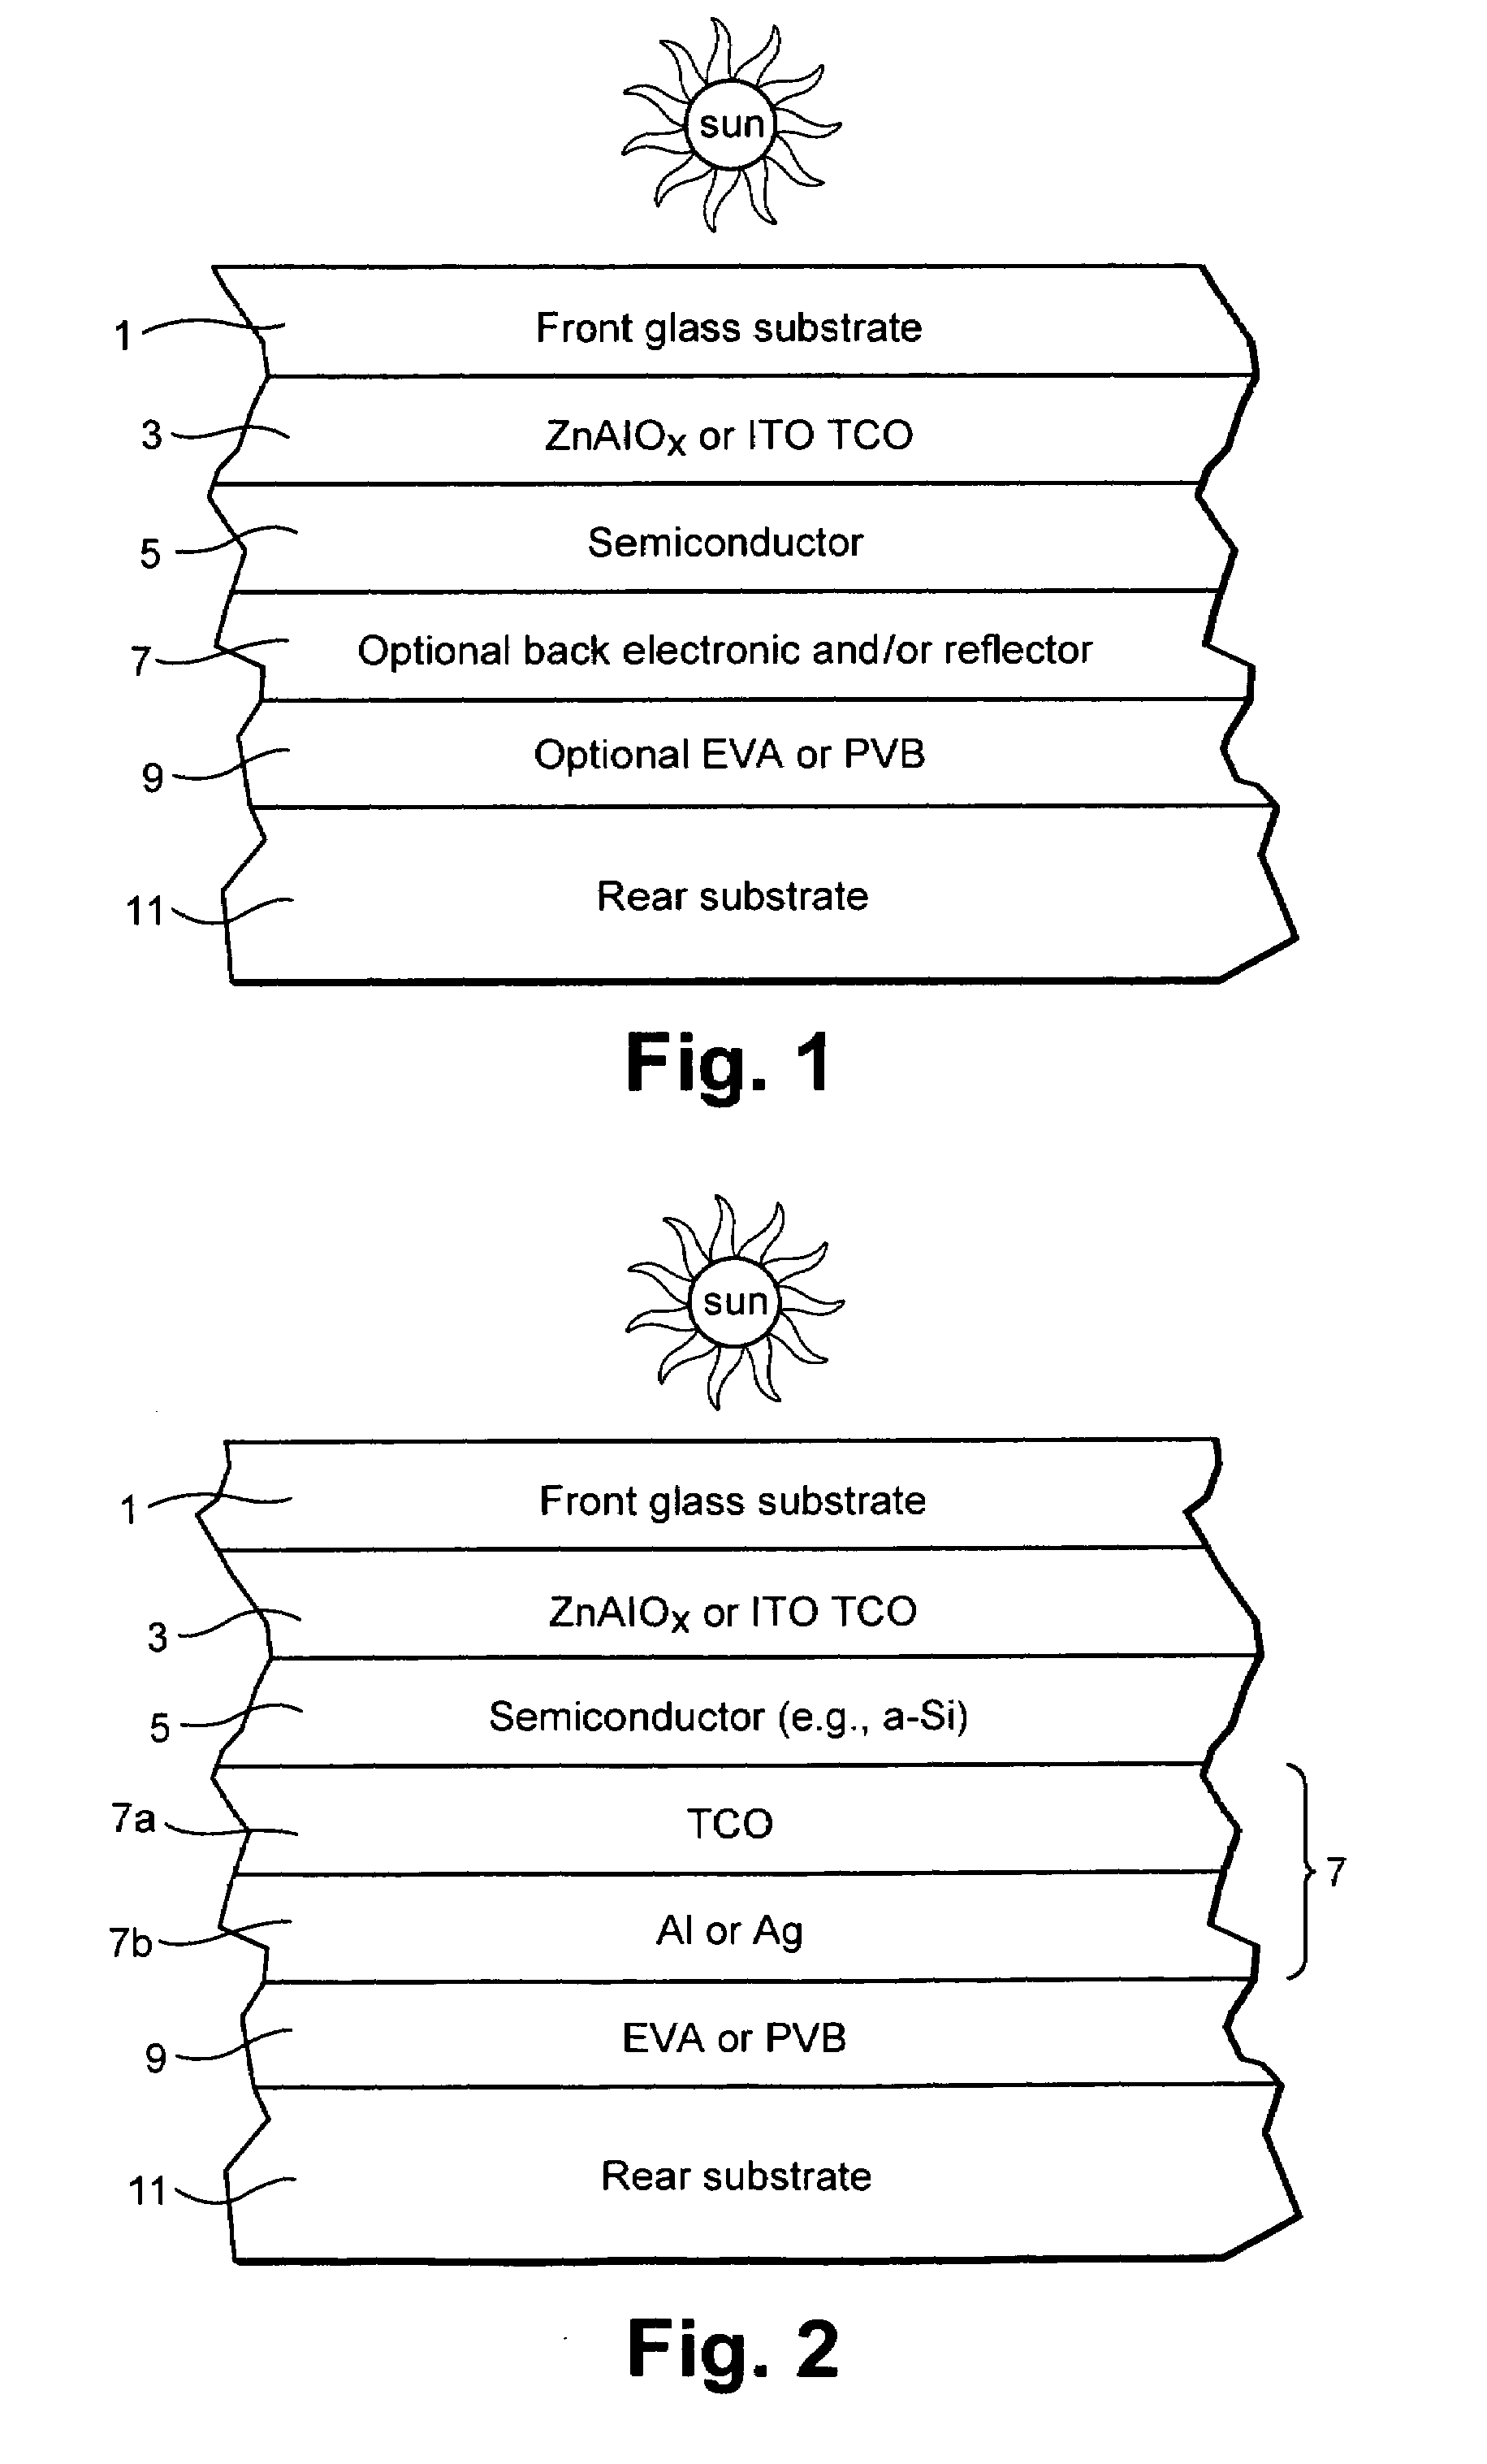 Method of enhancing the conductive and optical properties of deposited indium tin oxide (ITO) thin films